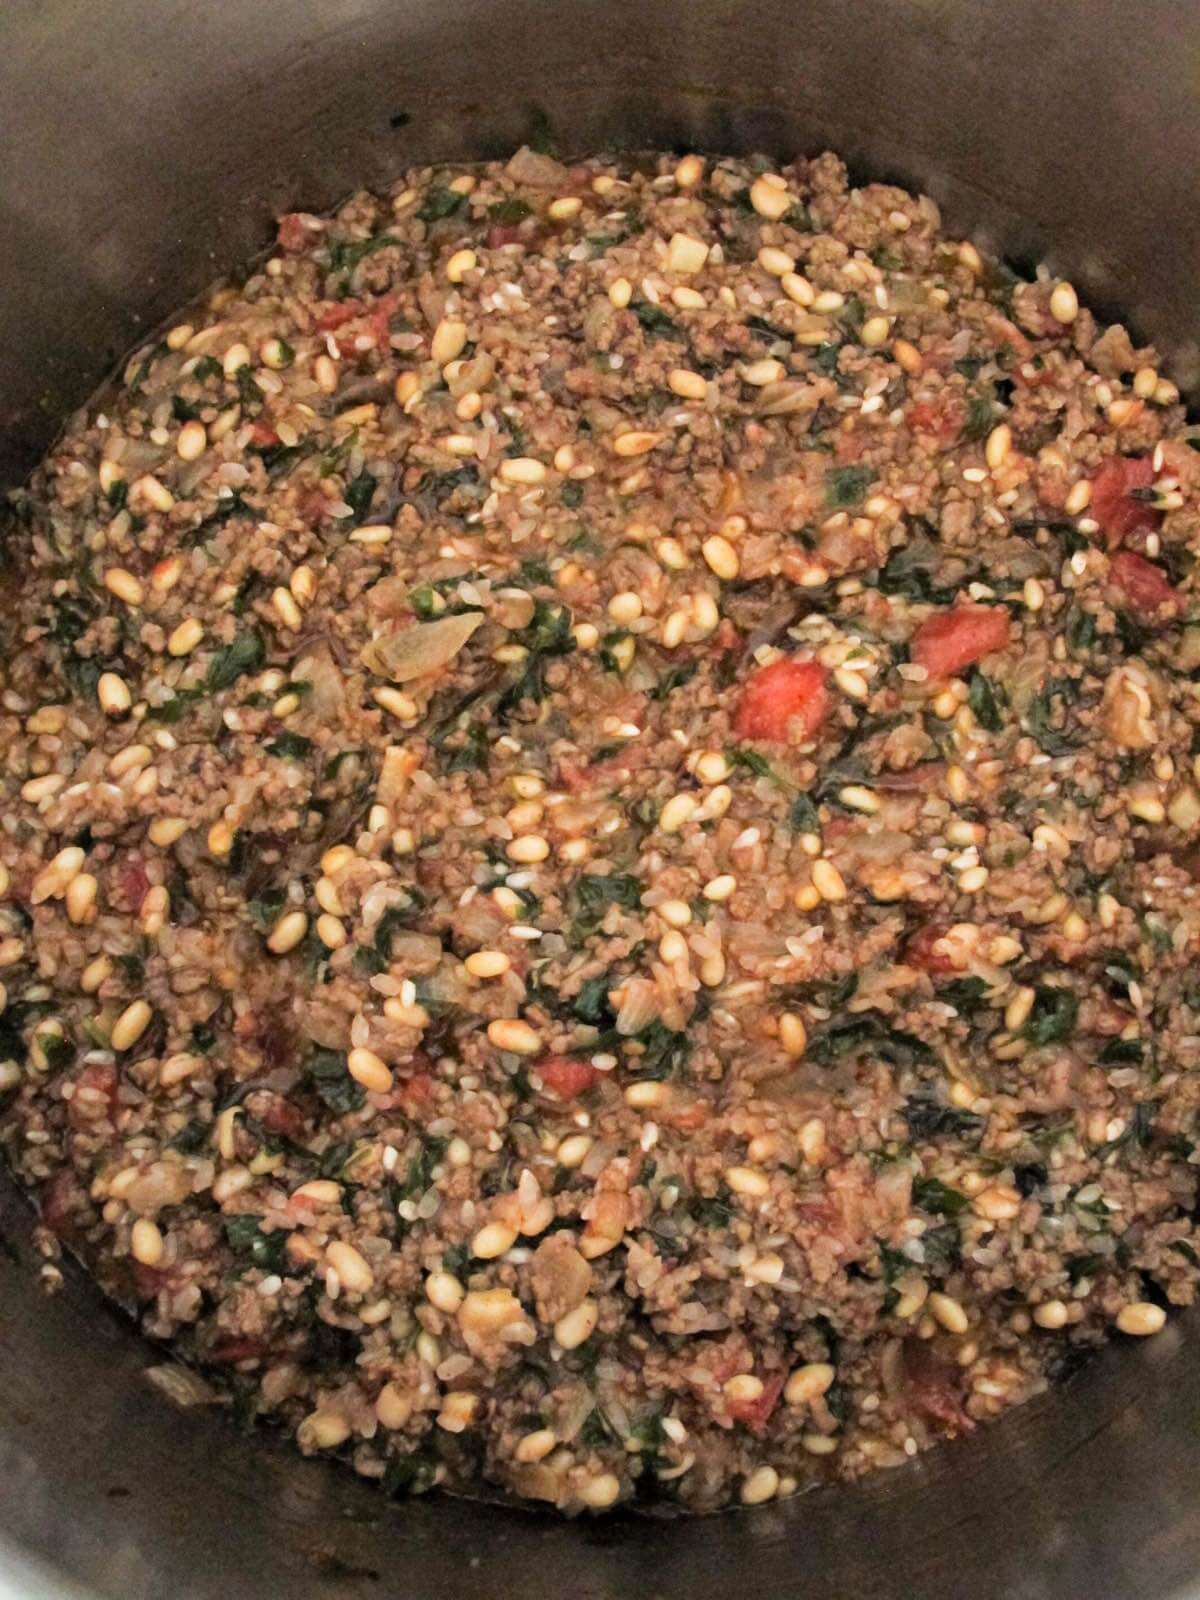 gemista filling of ground beef, rice, pine nuts, tomato juice, olive oil, and fresh herbs.